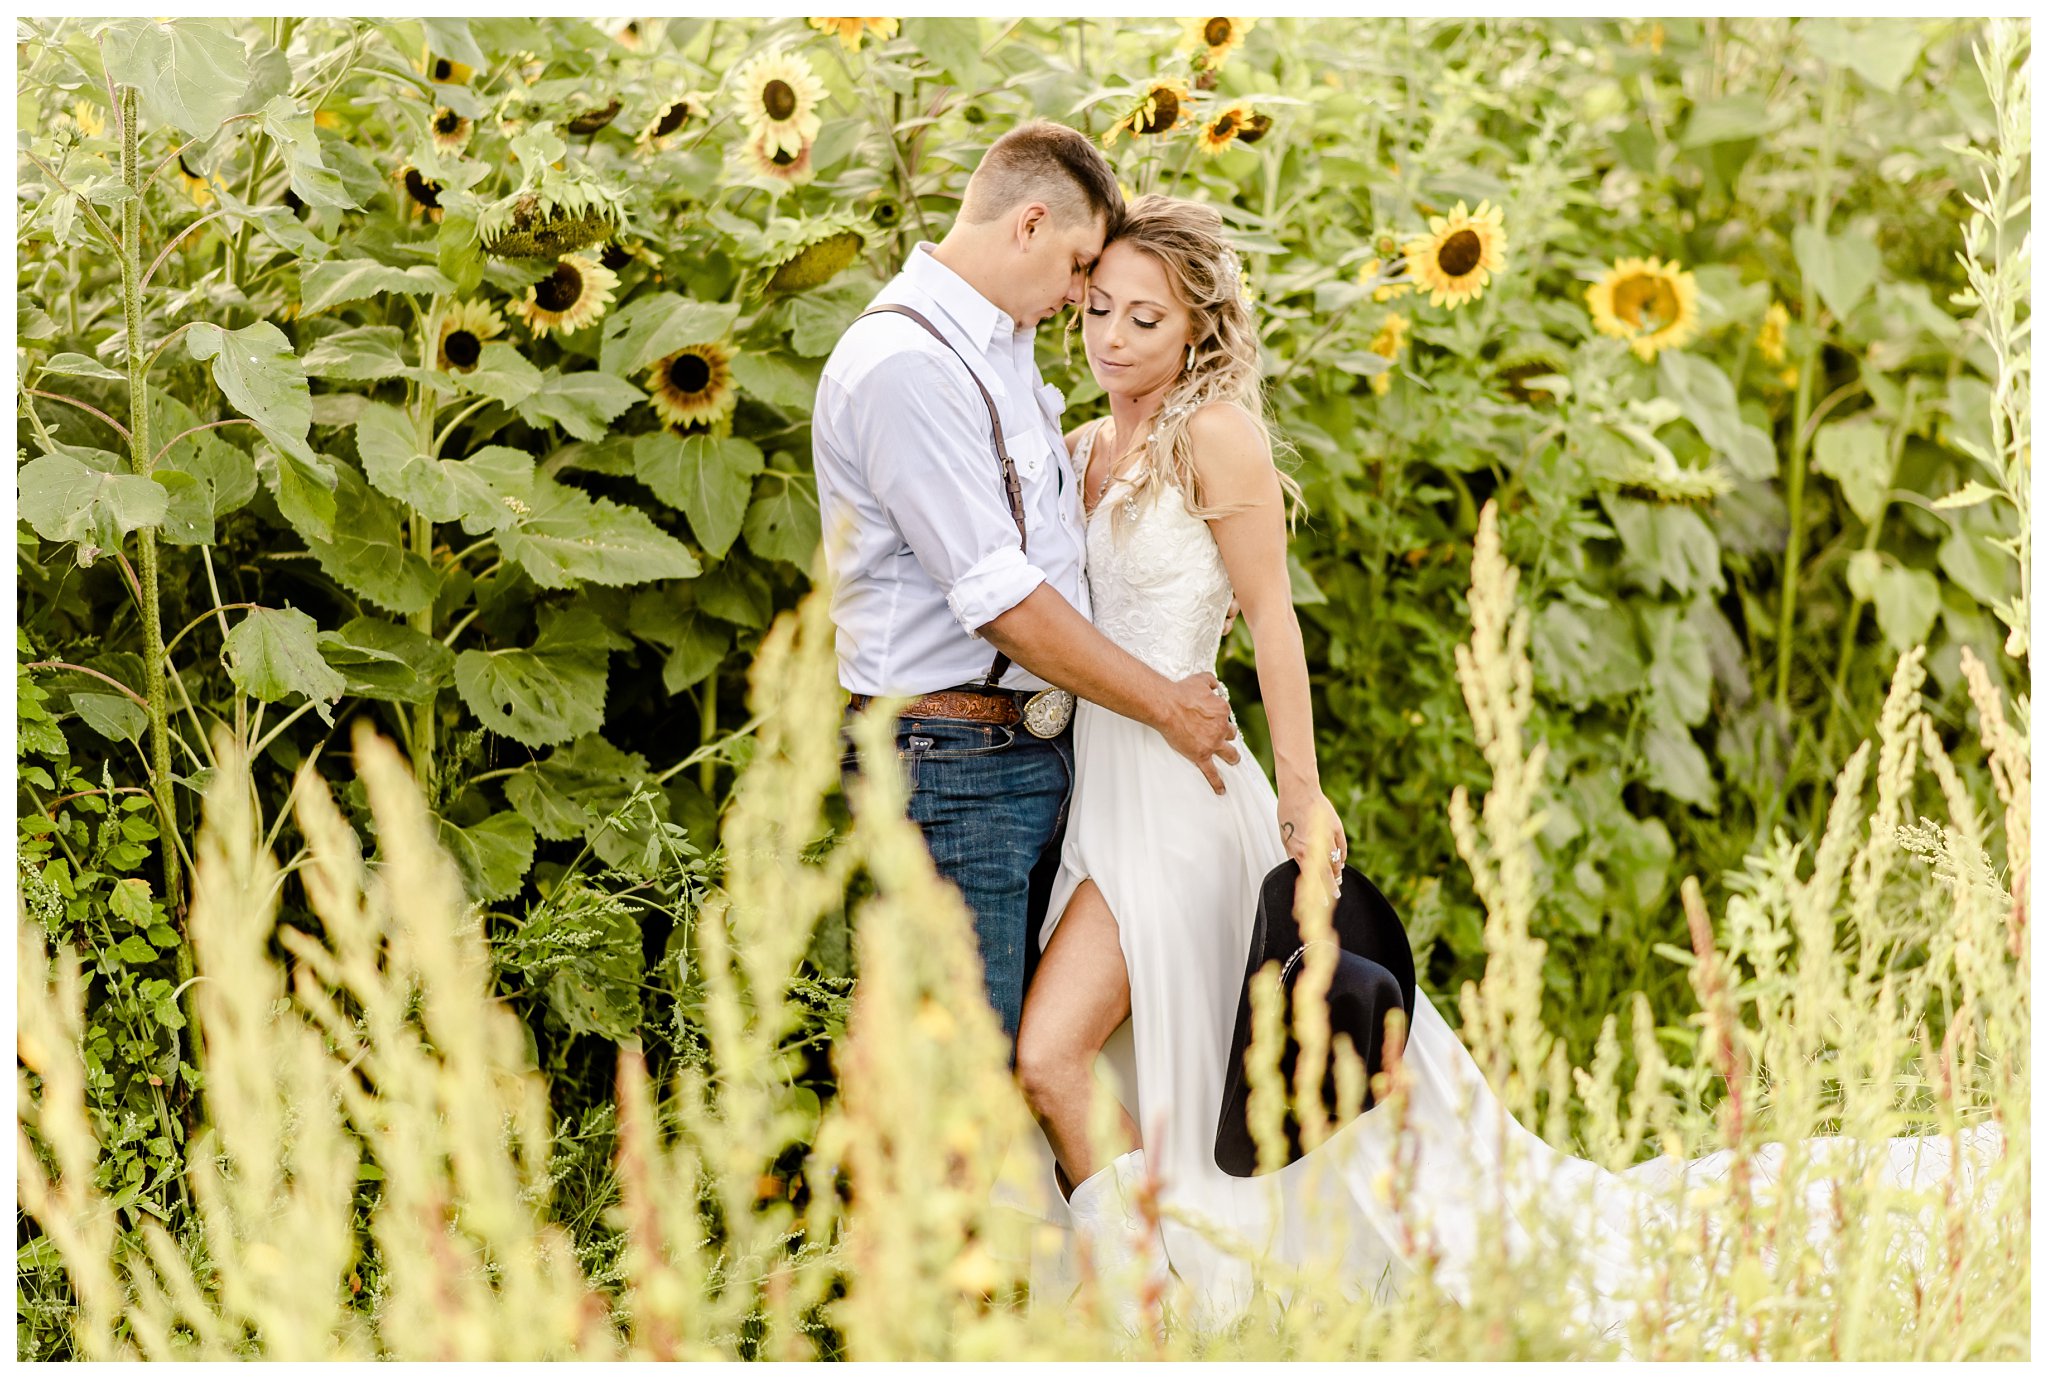 Elizabeth and Cody celebrate their wedding Delphi Falls and Springside Farms. Joanna Young Photography.